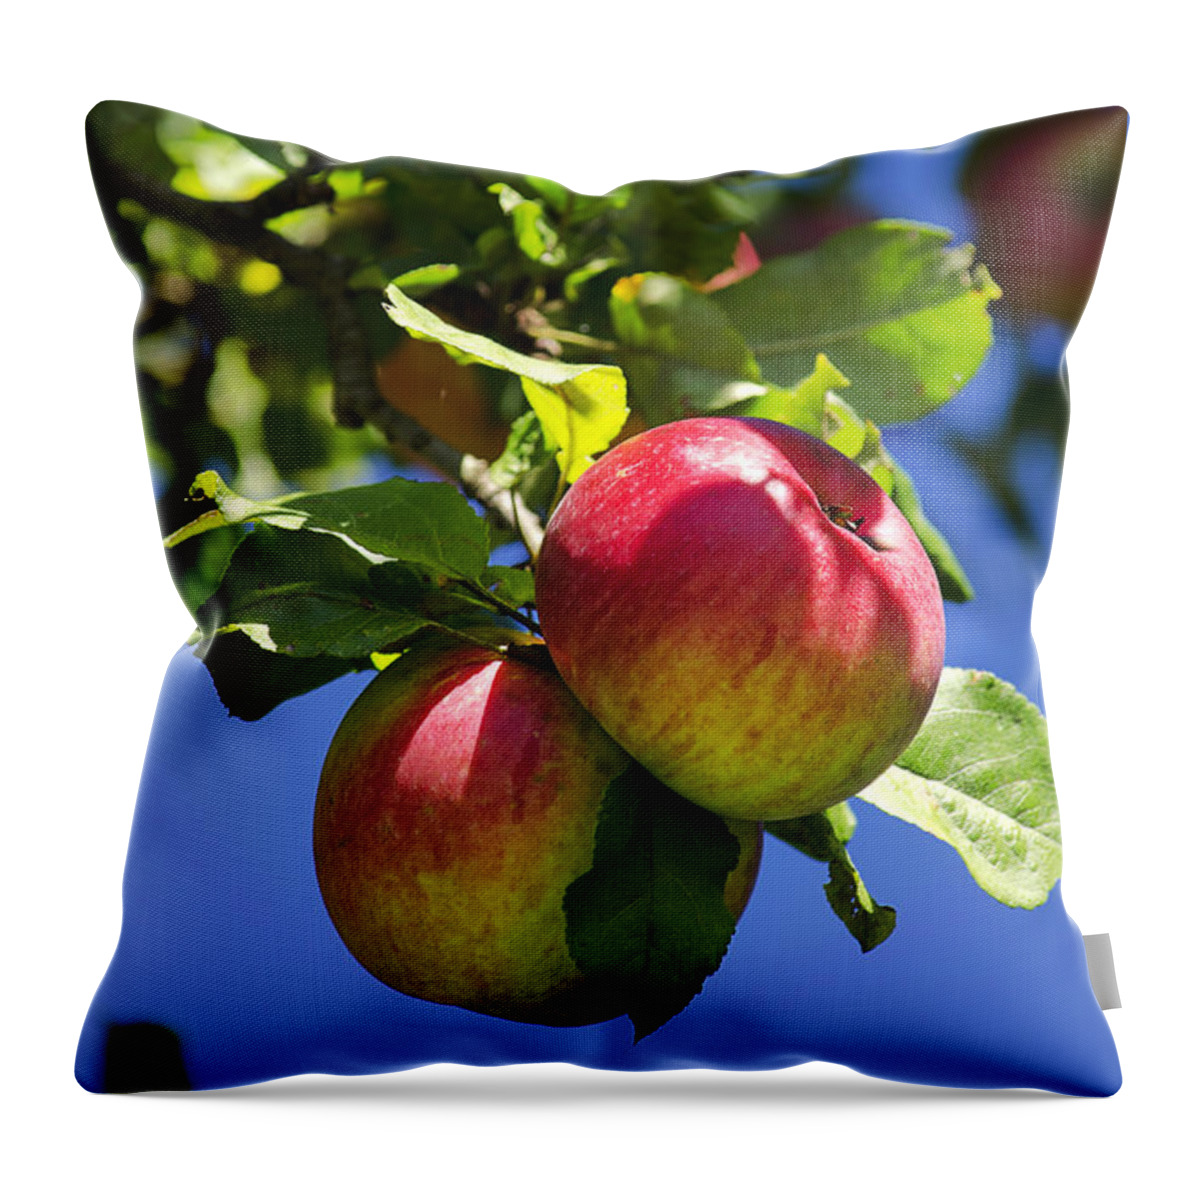 Apples Throw Pillow featuring the photograph Apples on Tree by Christina Rollo